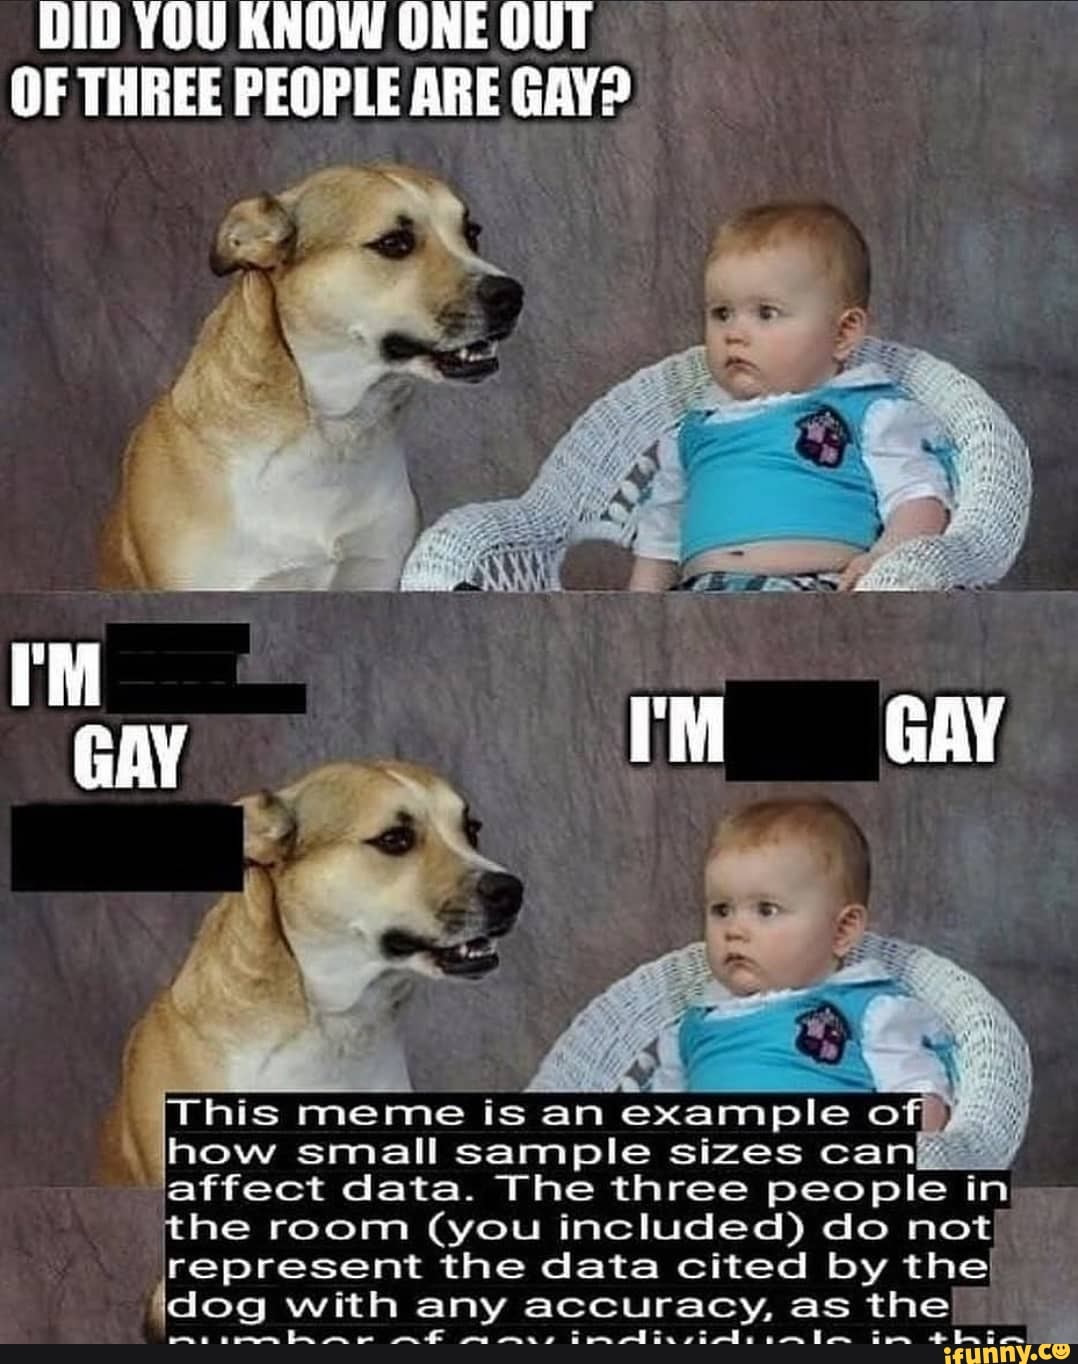 2 out of 3 people are gay meme